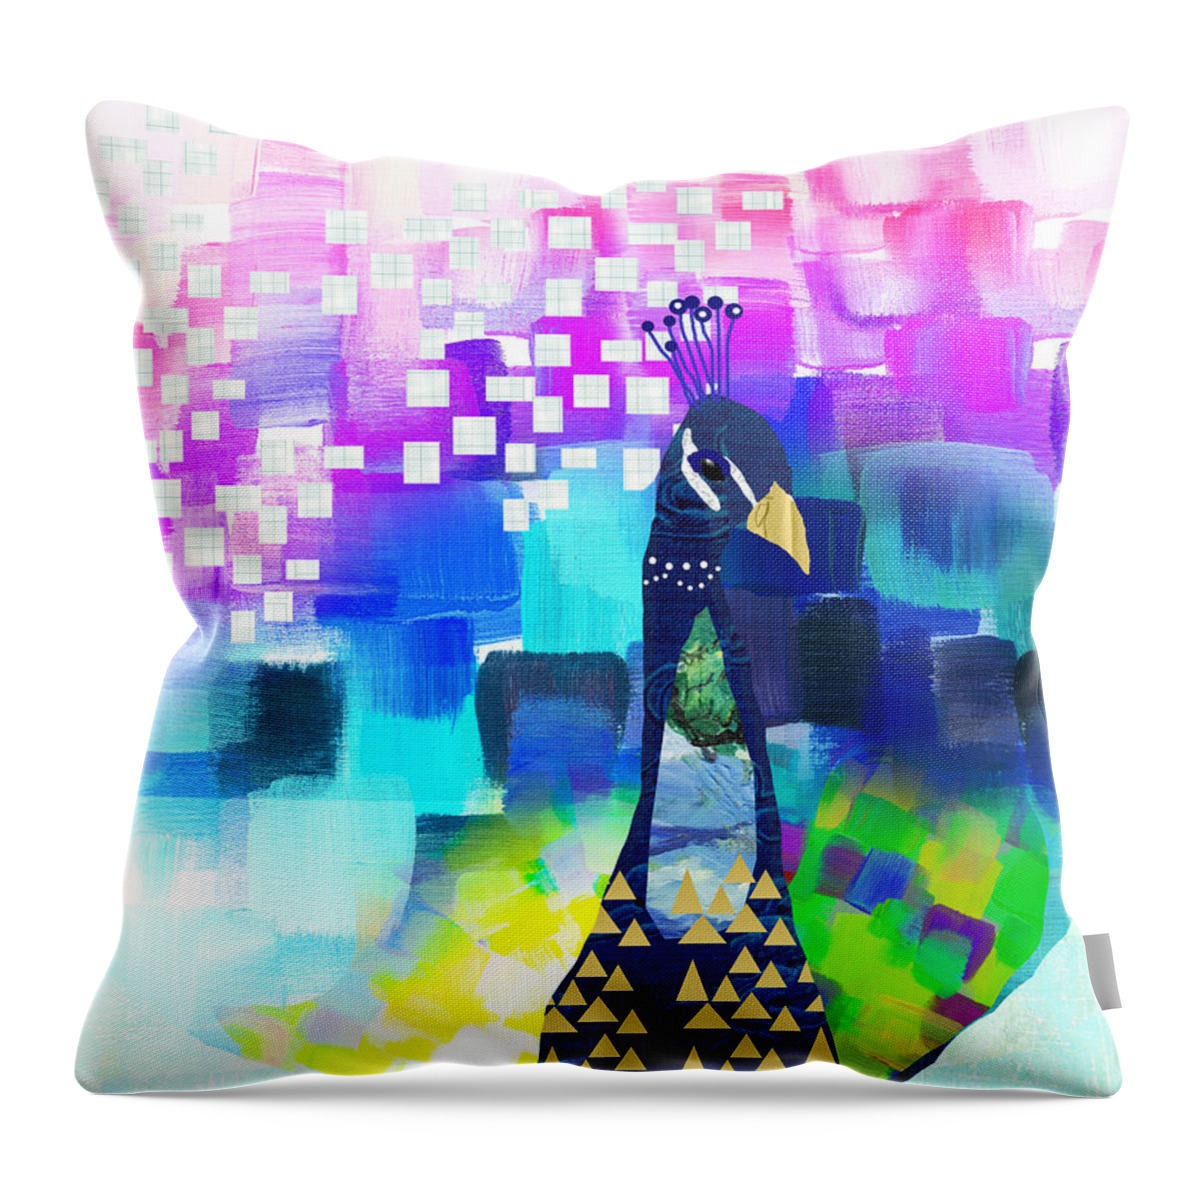 Peacock Collage Throw Pillow featuring the mixed media Peacock Collage by Claudia Schoen